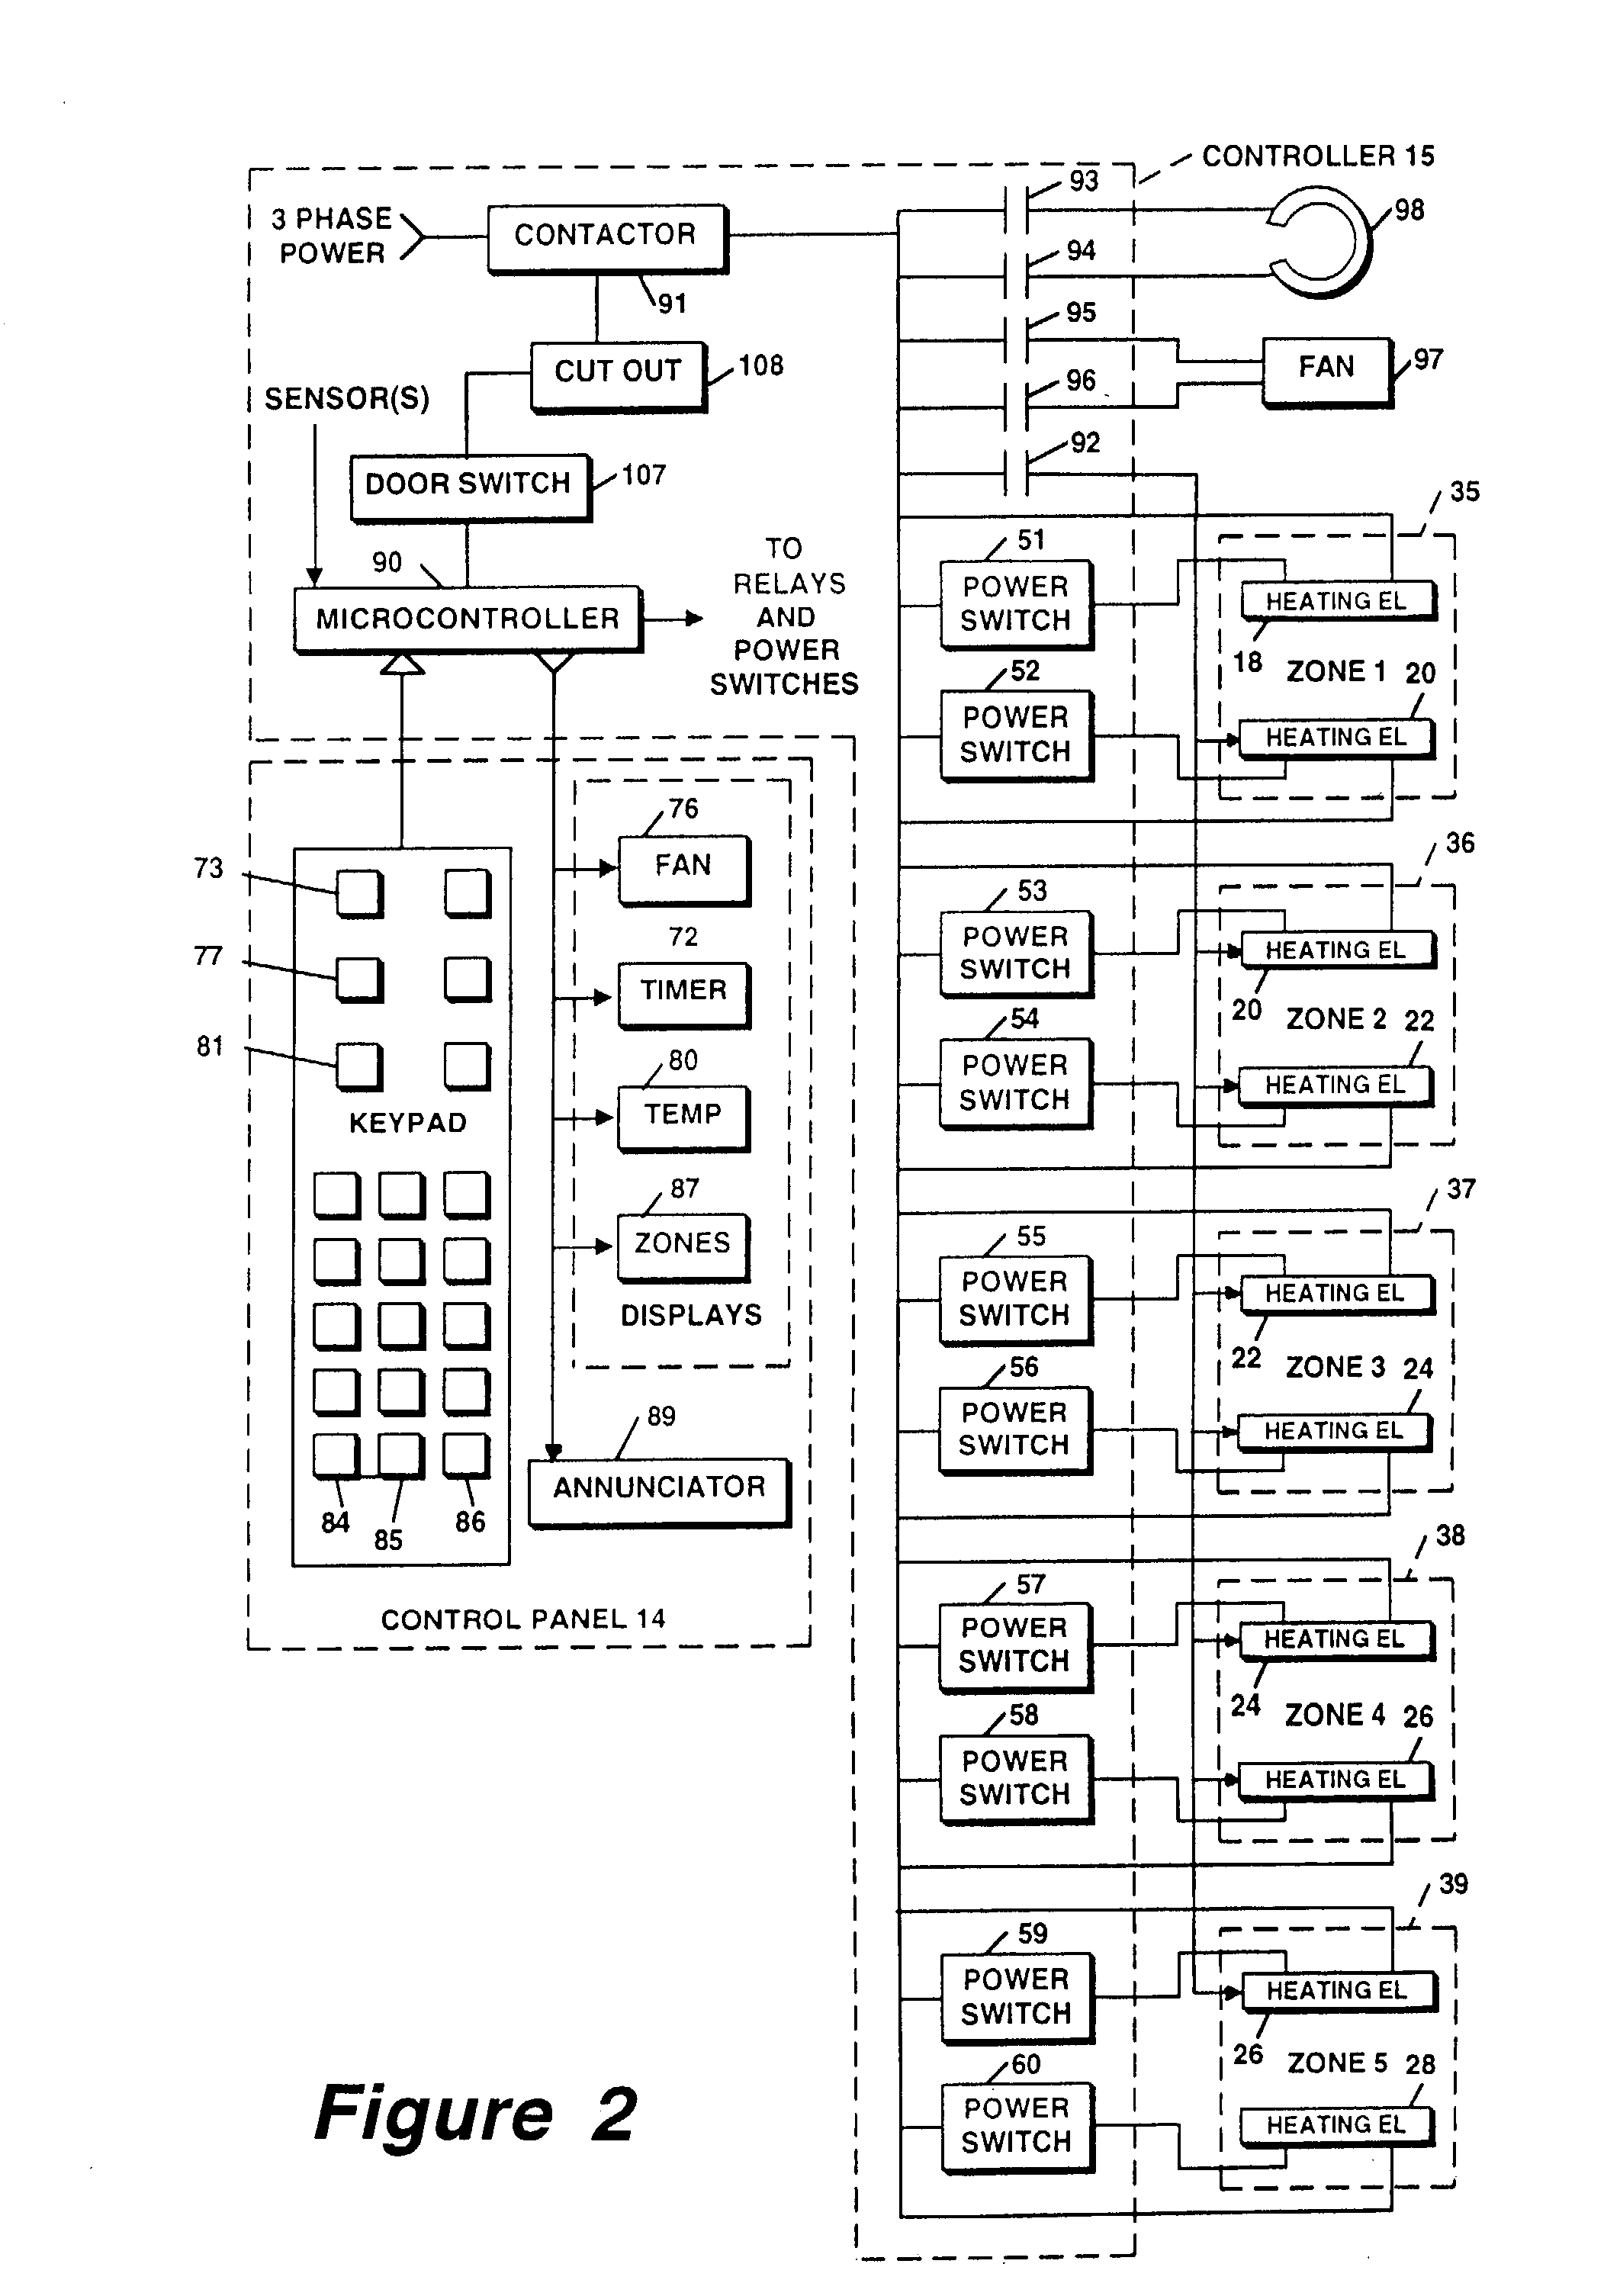 Multiple panel oven having individual controls for combined conductive and radiant heating panels